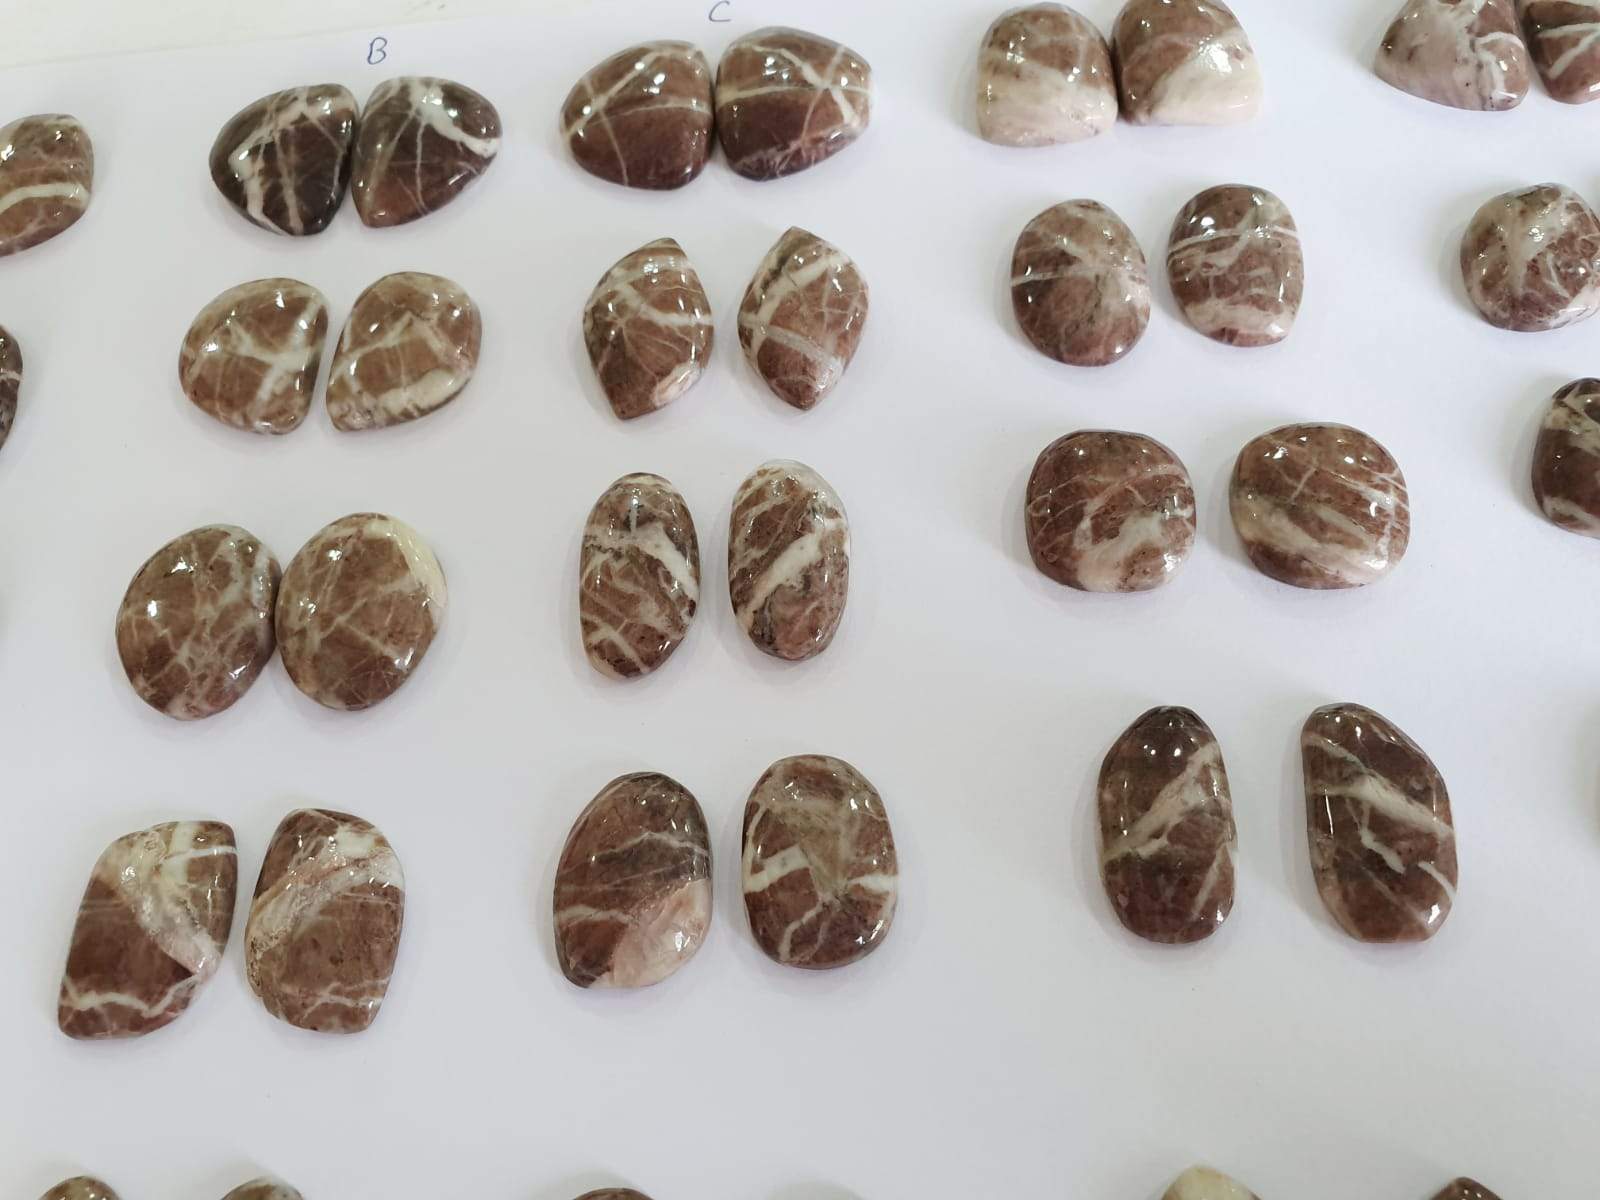 BROWN Natural Jasper Cabochons Pairs for Earrings UNTREATED - The LabradoriteKing